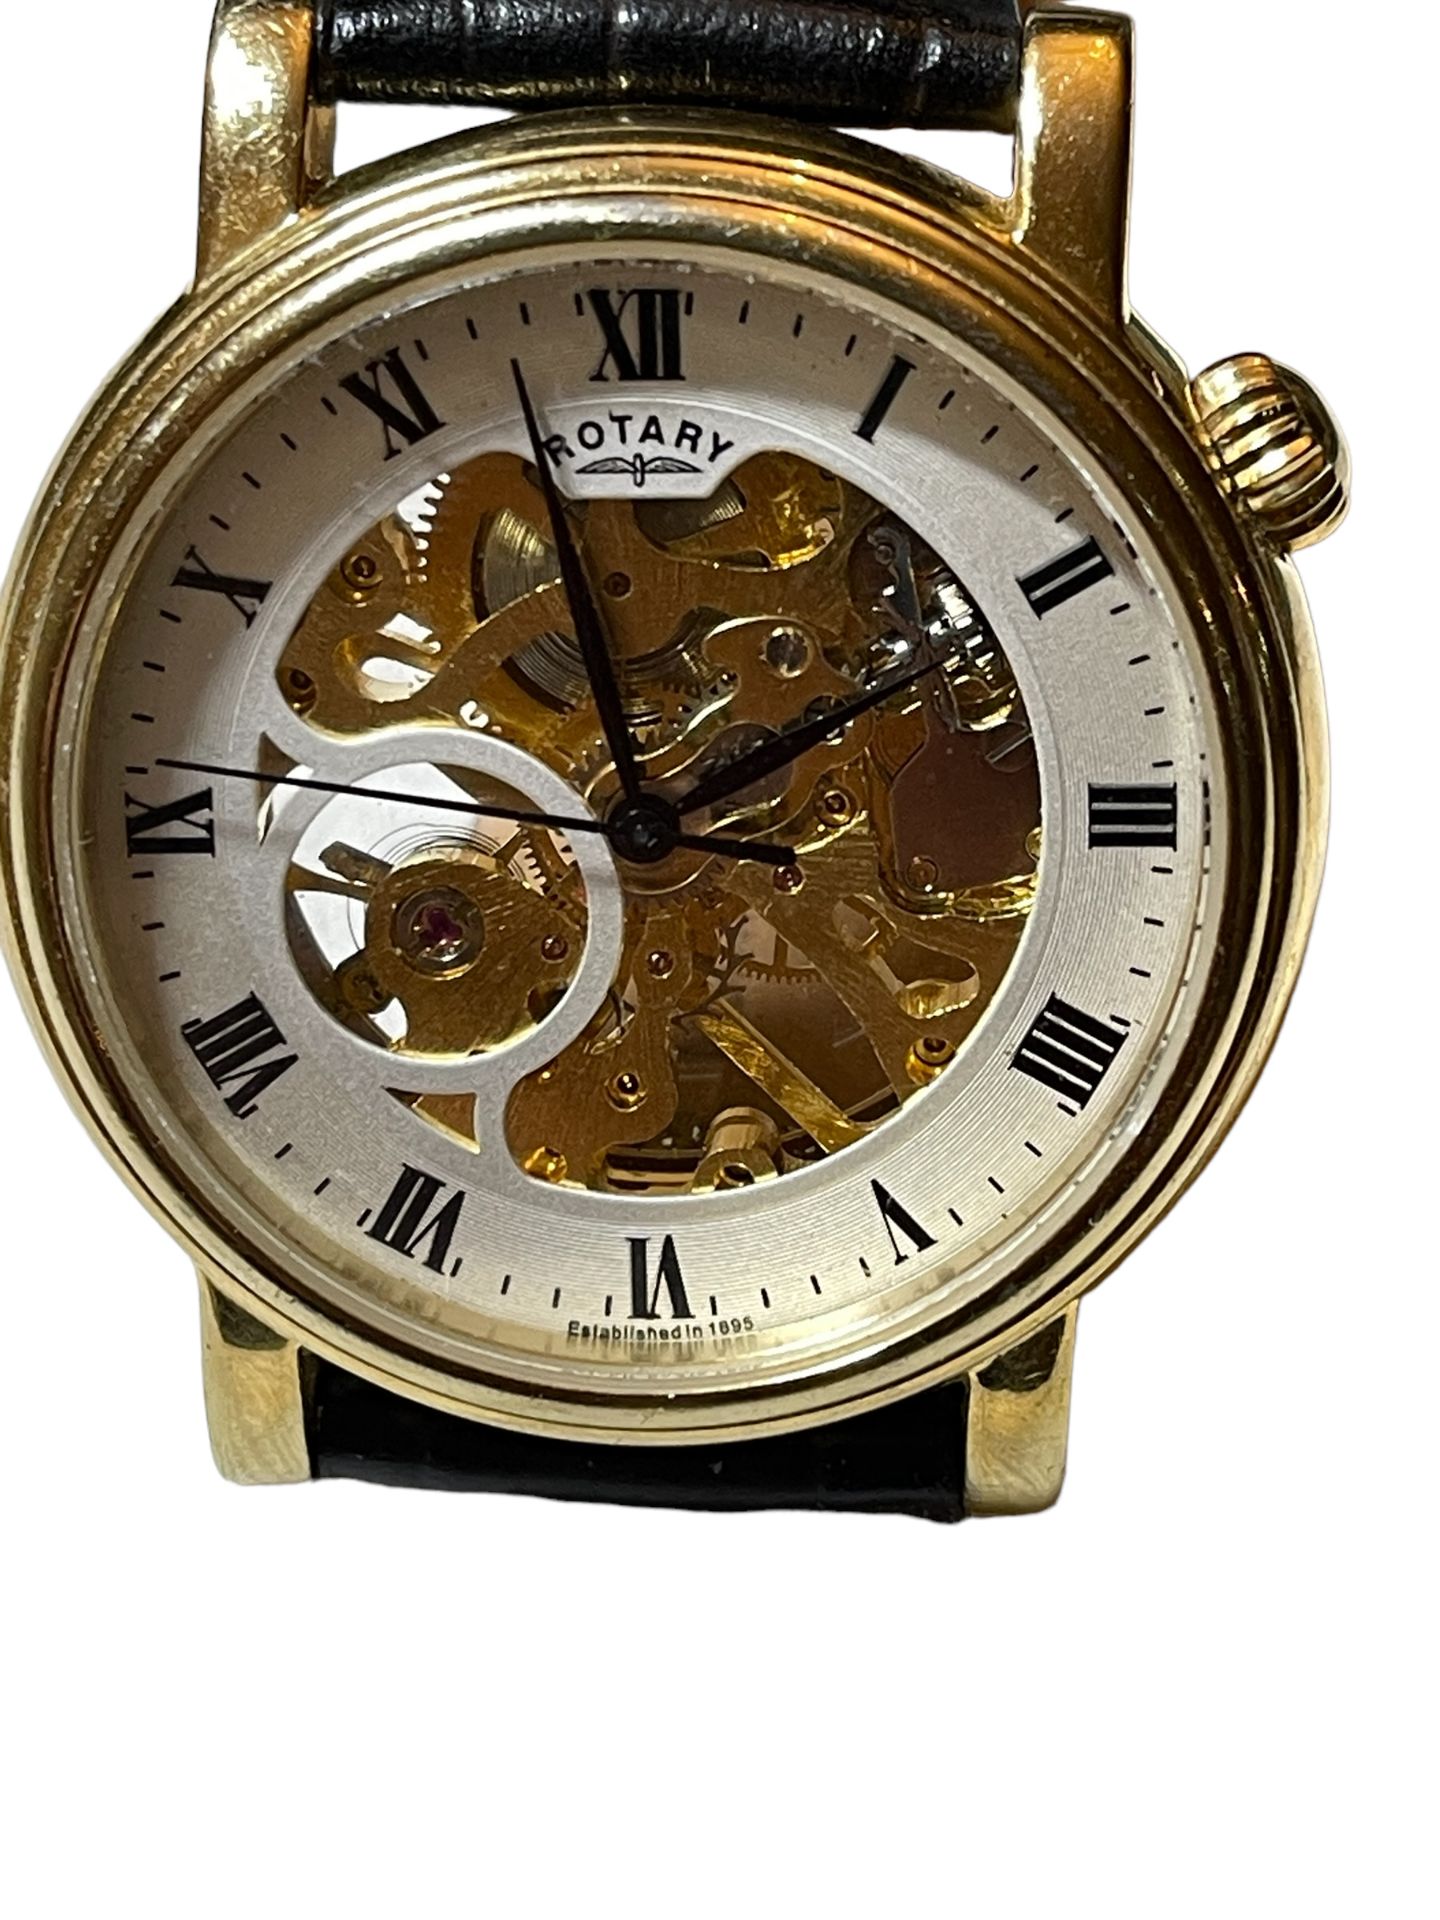 Men’s Rotary Skeleton Watch Leather Strap - Image 3 of 4